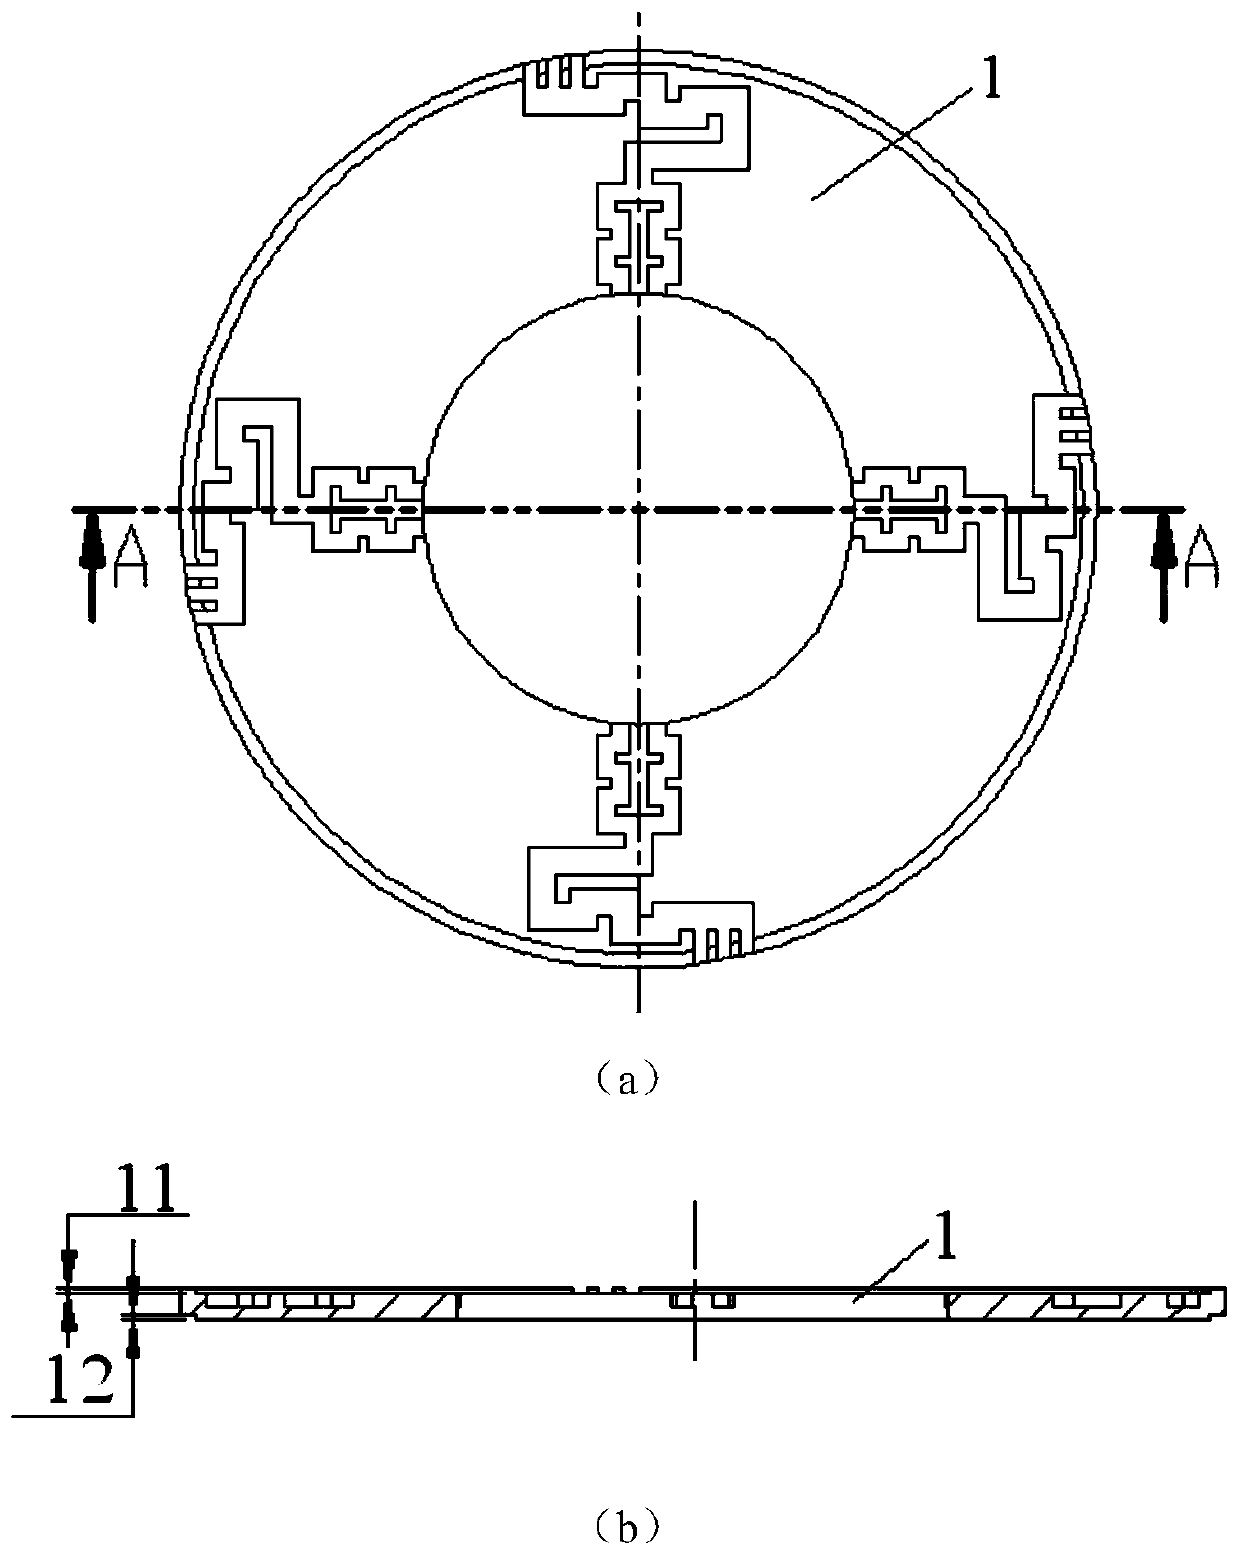 A control valve labyrinth disc assembly structure with guide sleeve